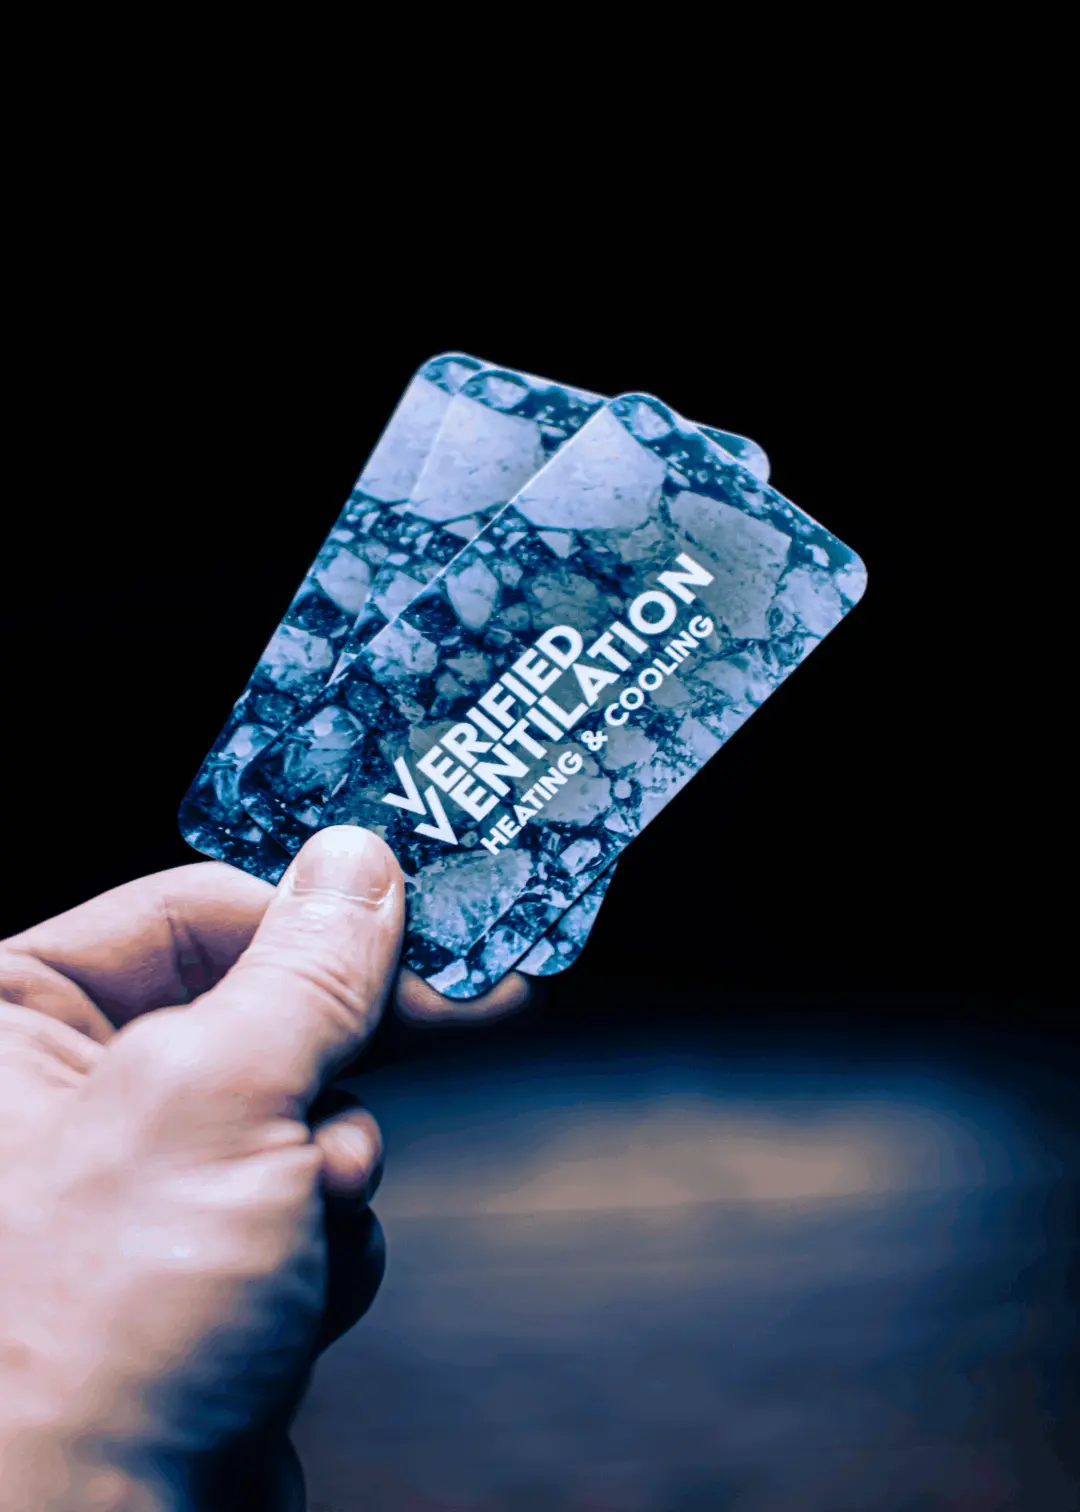 An animated image showing the front side of Verified Ventilations business cards being twisted to show the glossy coating of the cards.